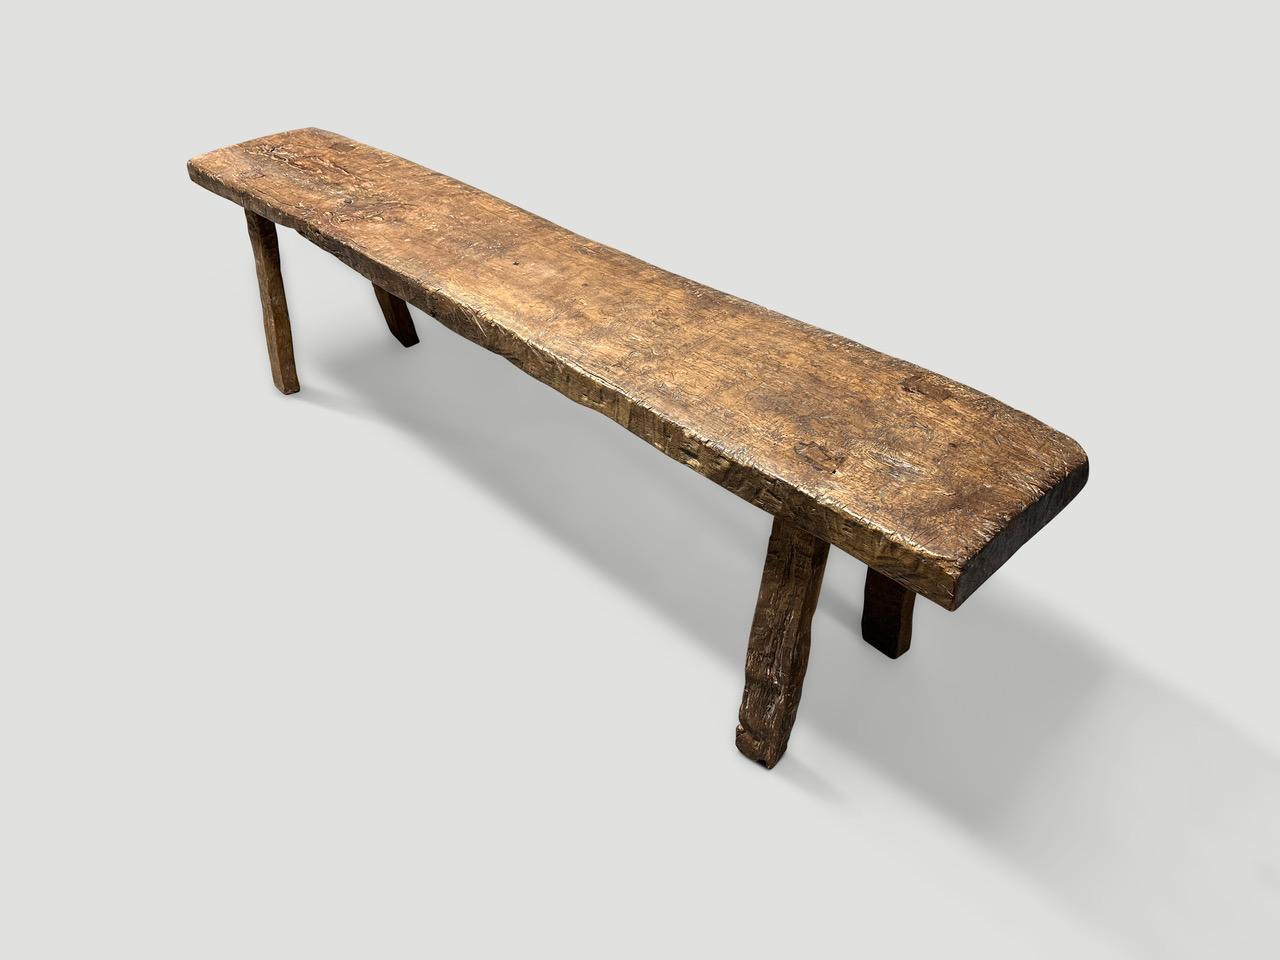 Beautiful antique bench hand made from a single two inch thick slab of teak wood with lovely patina. Circa 1930.

This bench was hand made in the spirit of Wabi-Sabi, a Japanese philosophy that beauty can be found in imperfection and impermanence.